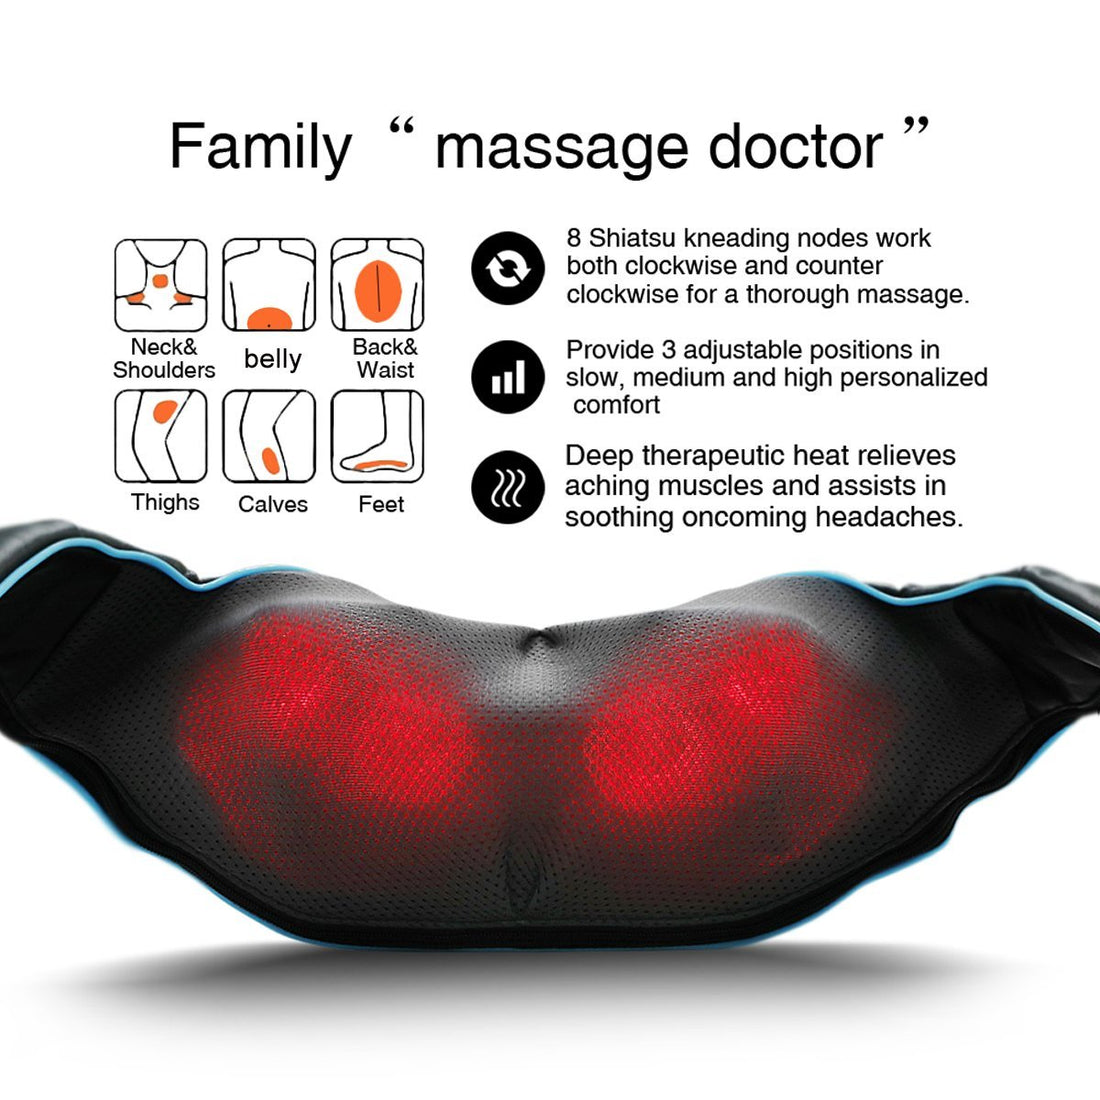 Shiatsu Back Shoulder and Neck Massager with Heat - Electric Deep Tissue 4D Kneading Massage for Shoulder, Back and Neck - Best Gifts for Women/Men/mom/dad - FDA Approved